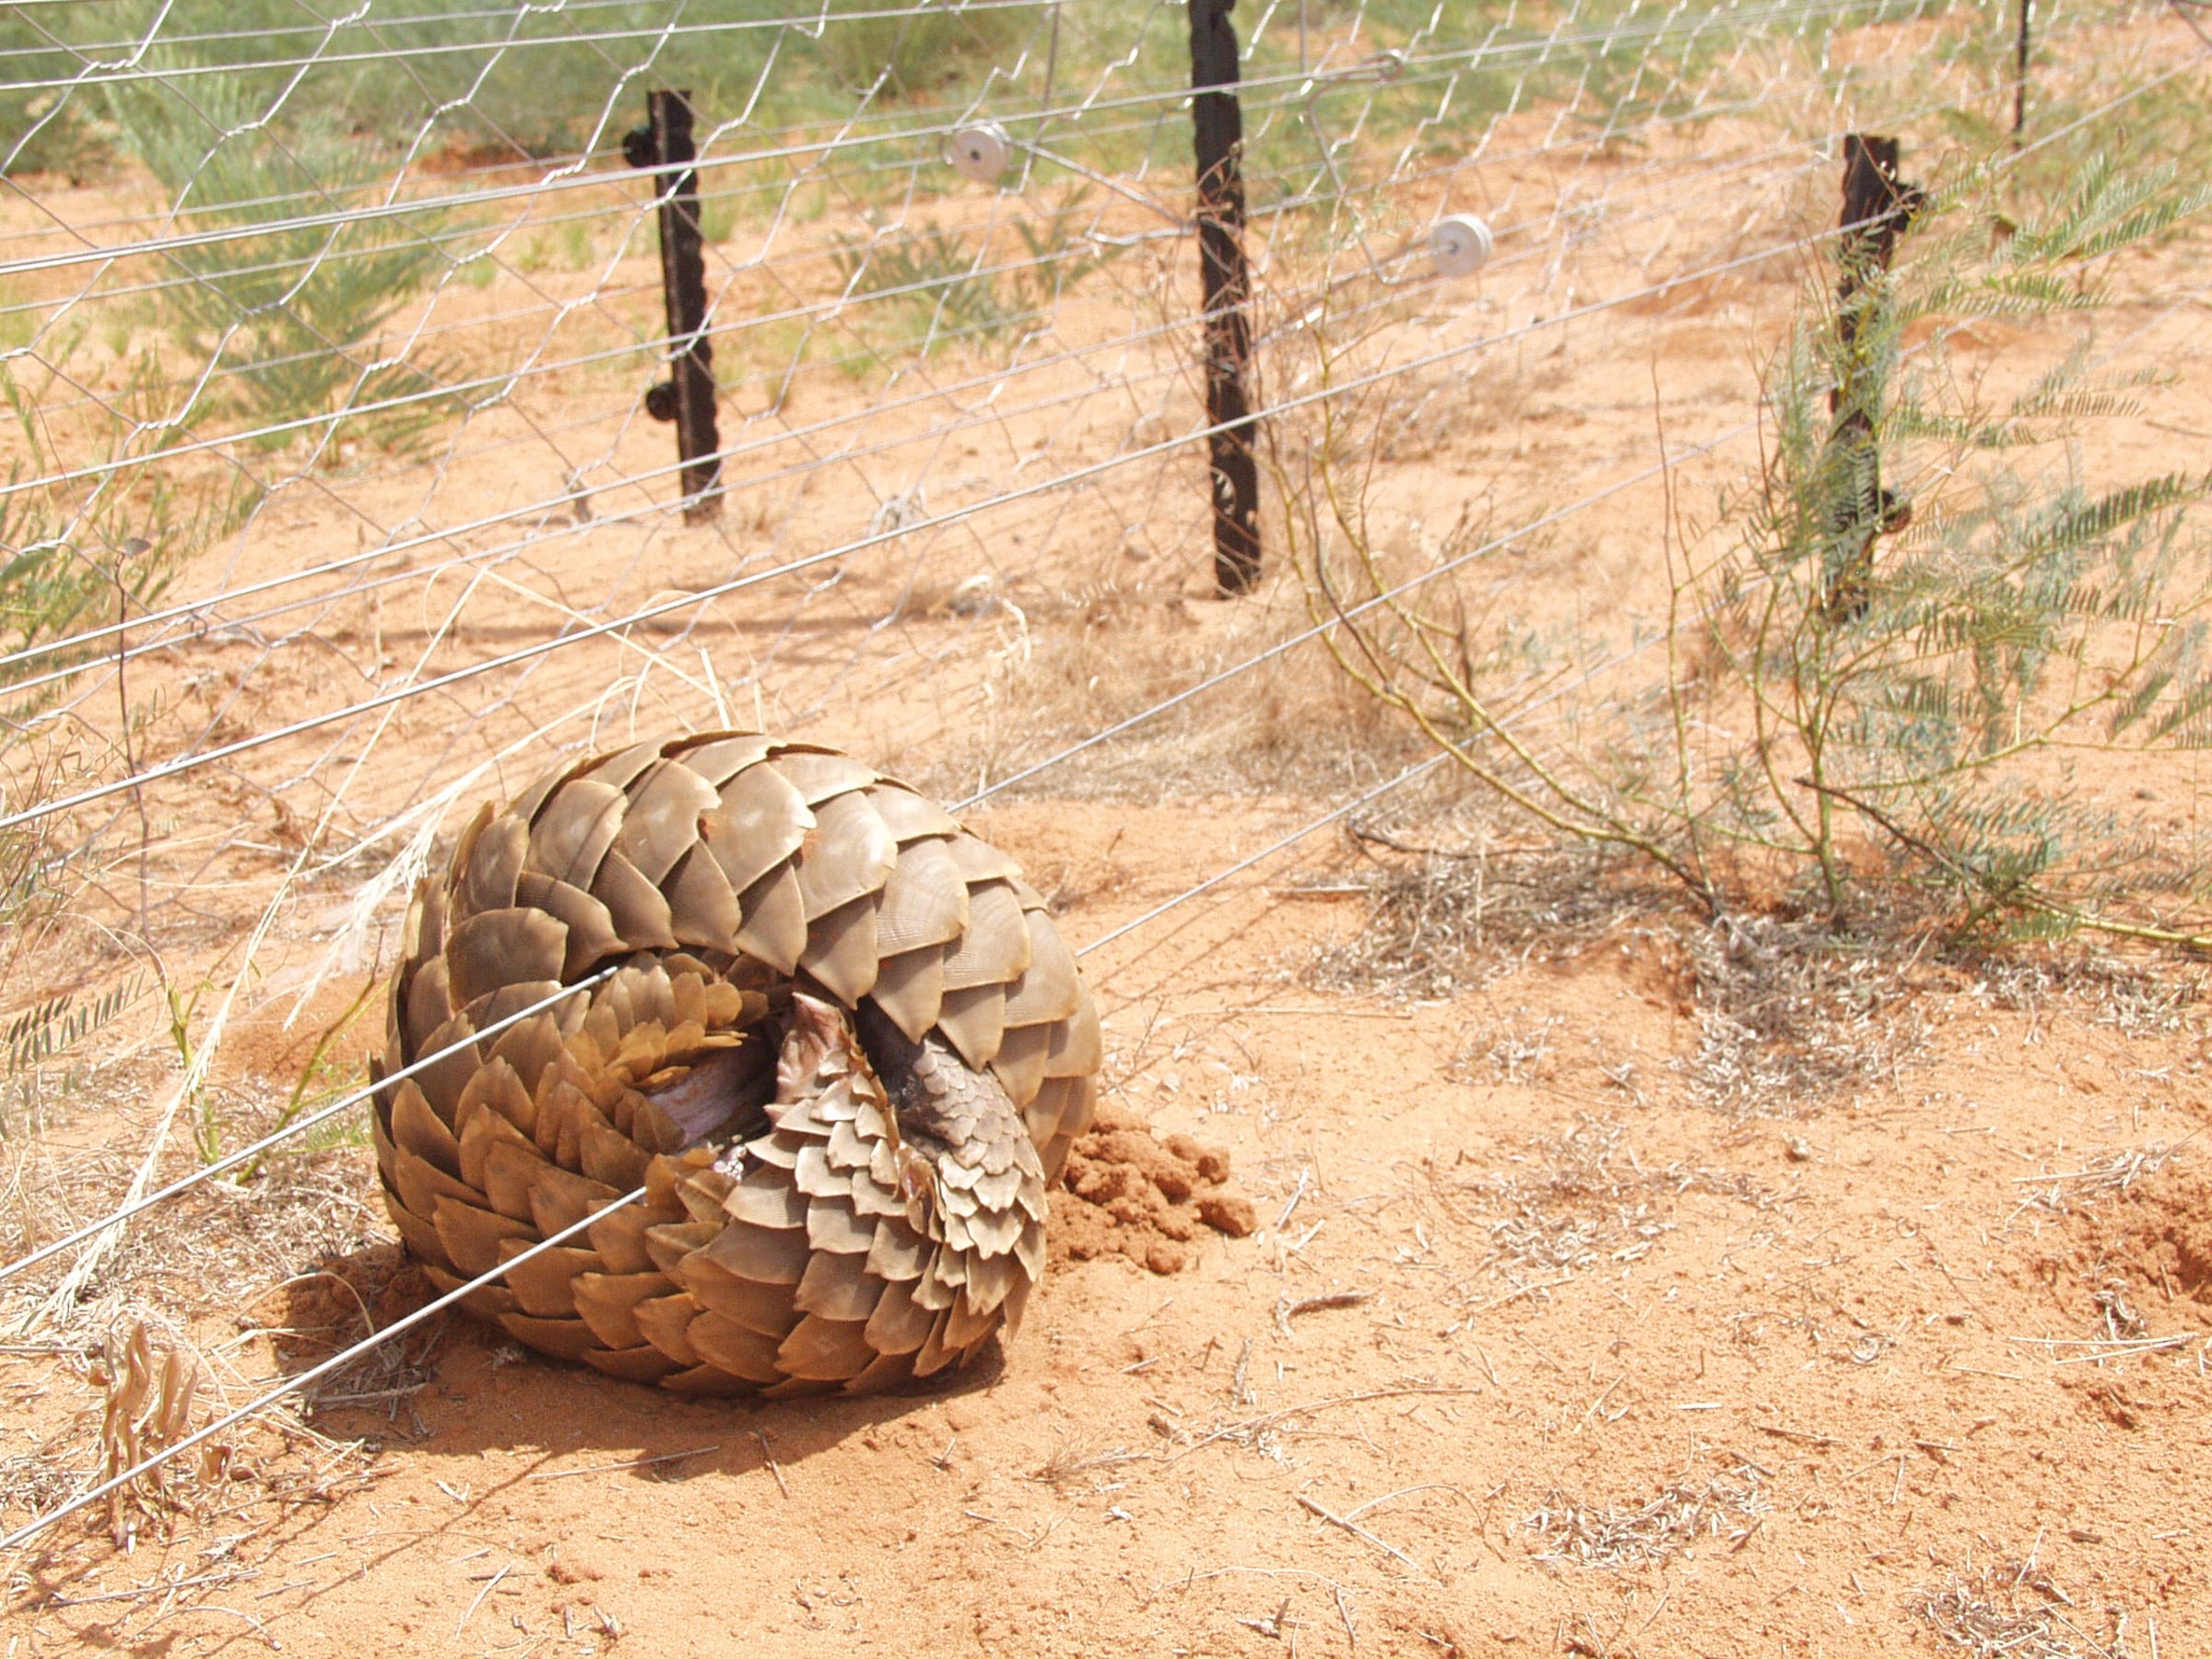 A ground pangolin curled up and trapped on an electric fence in South Africa